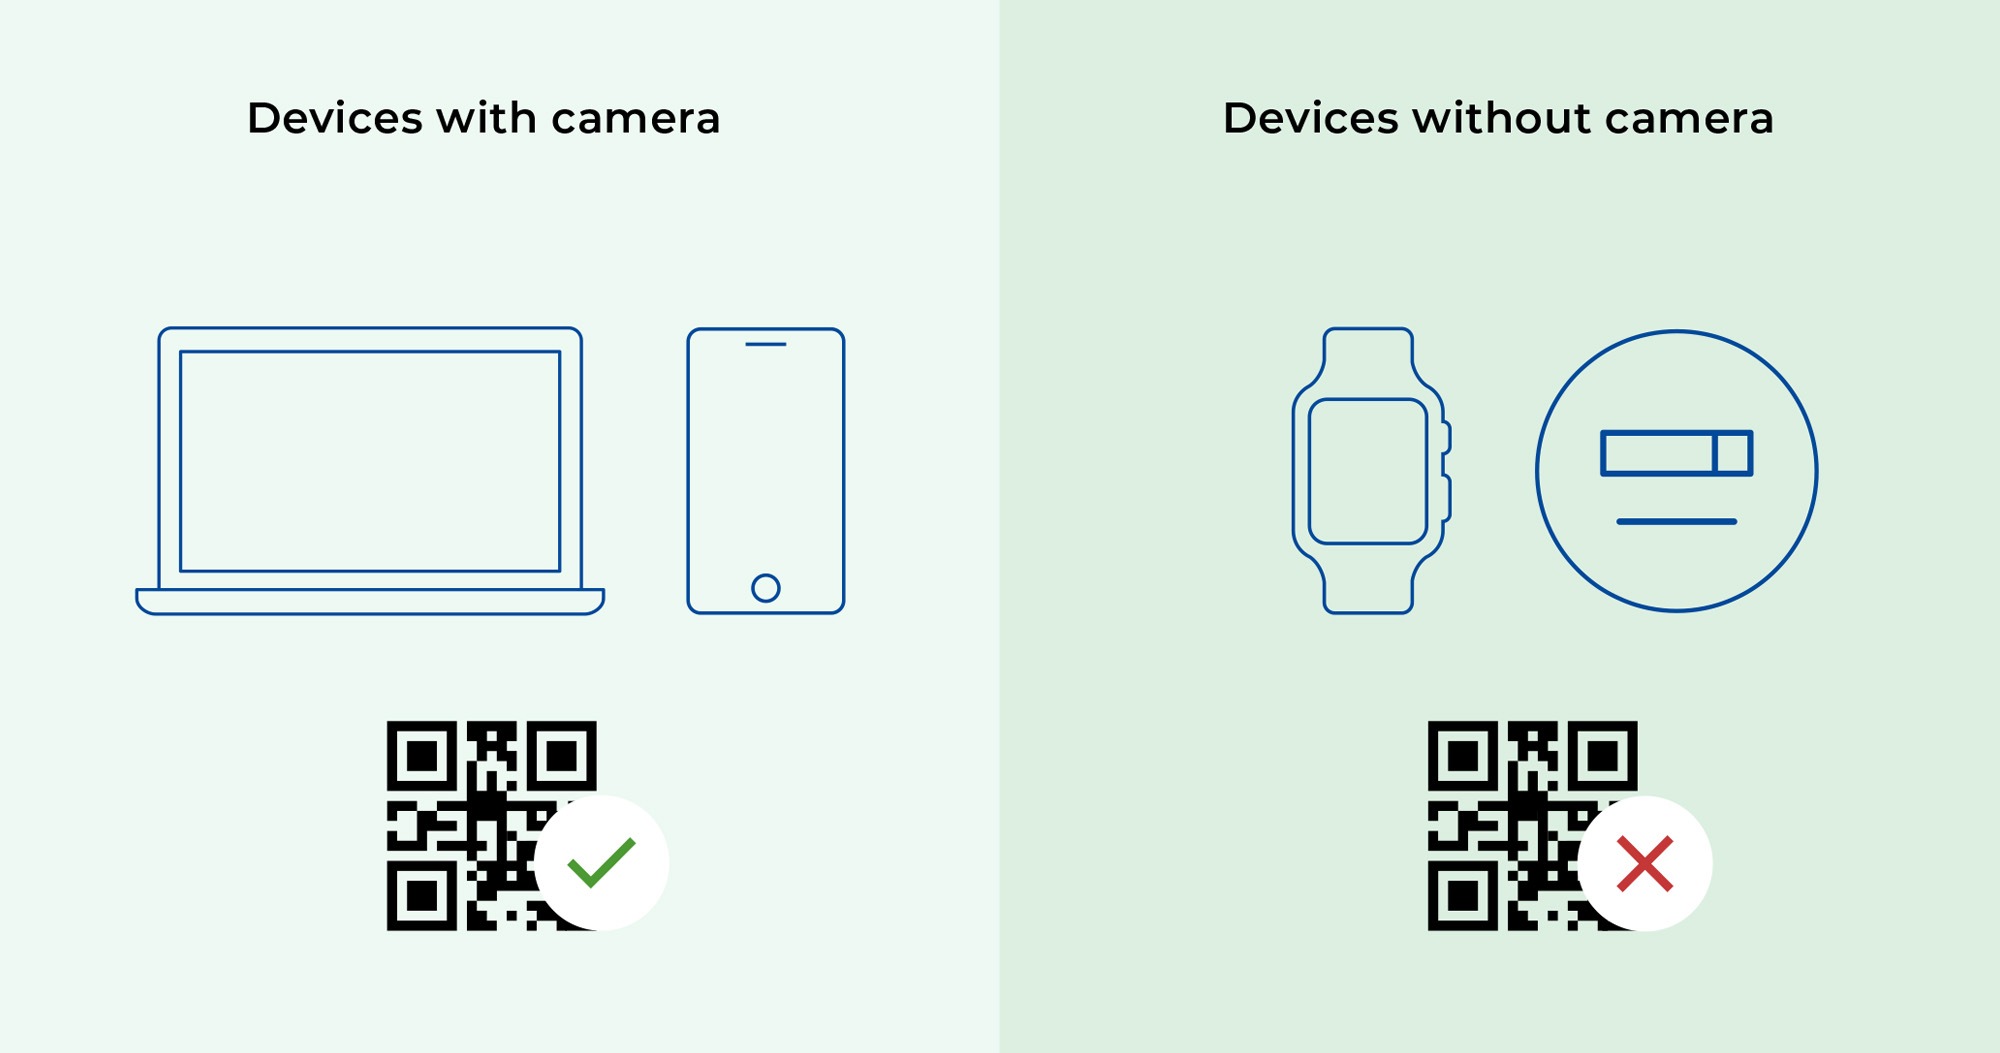 Only devices with a camera can activate eSIM using a QR code